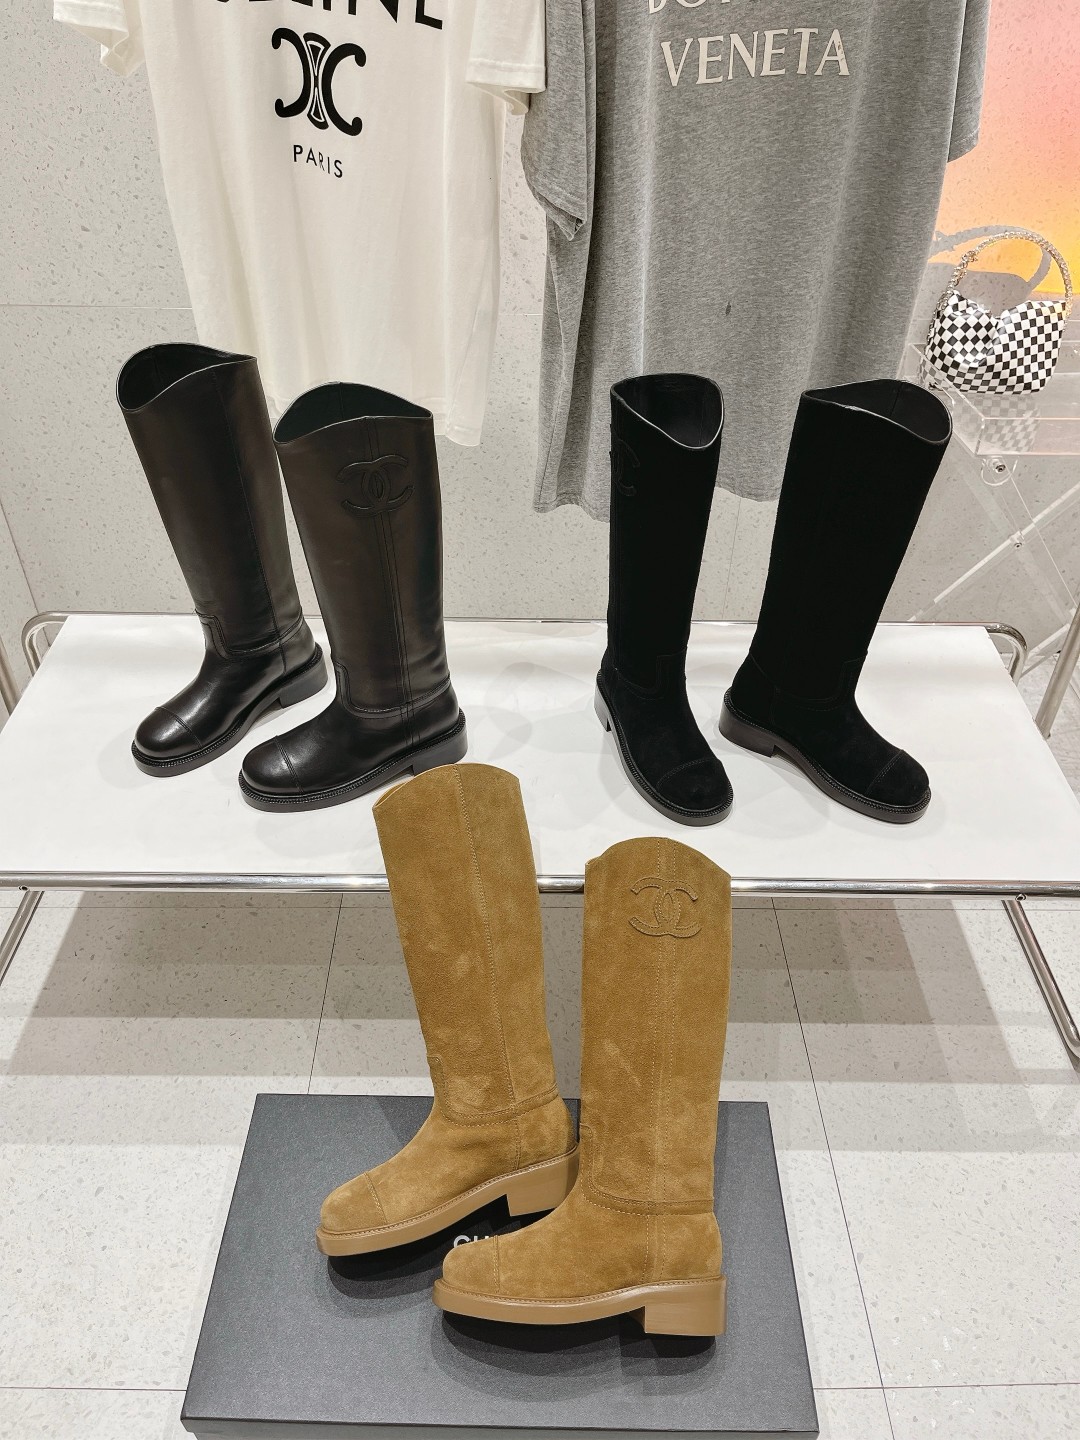 Chanel Long Boots At Cheap Price